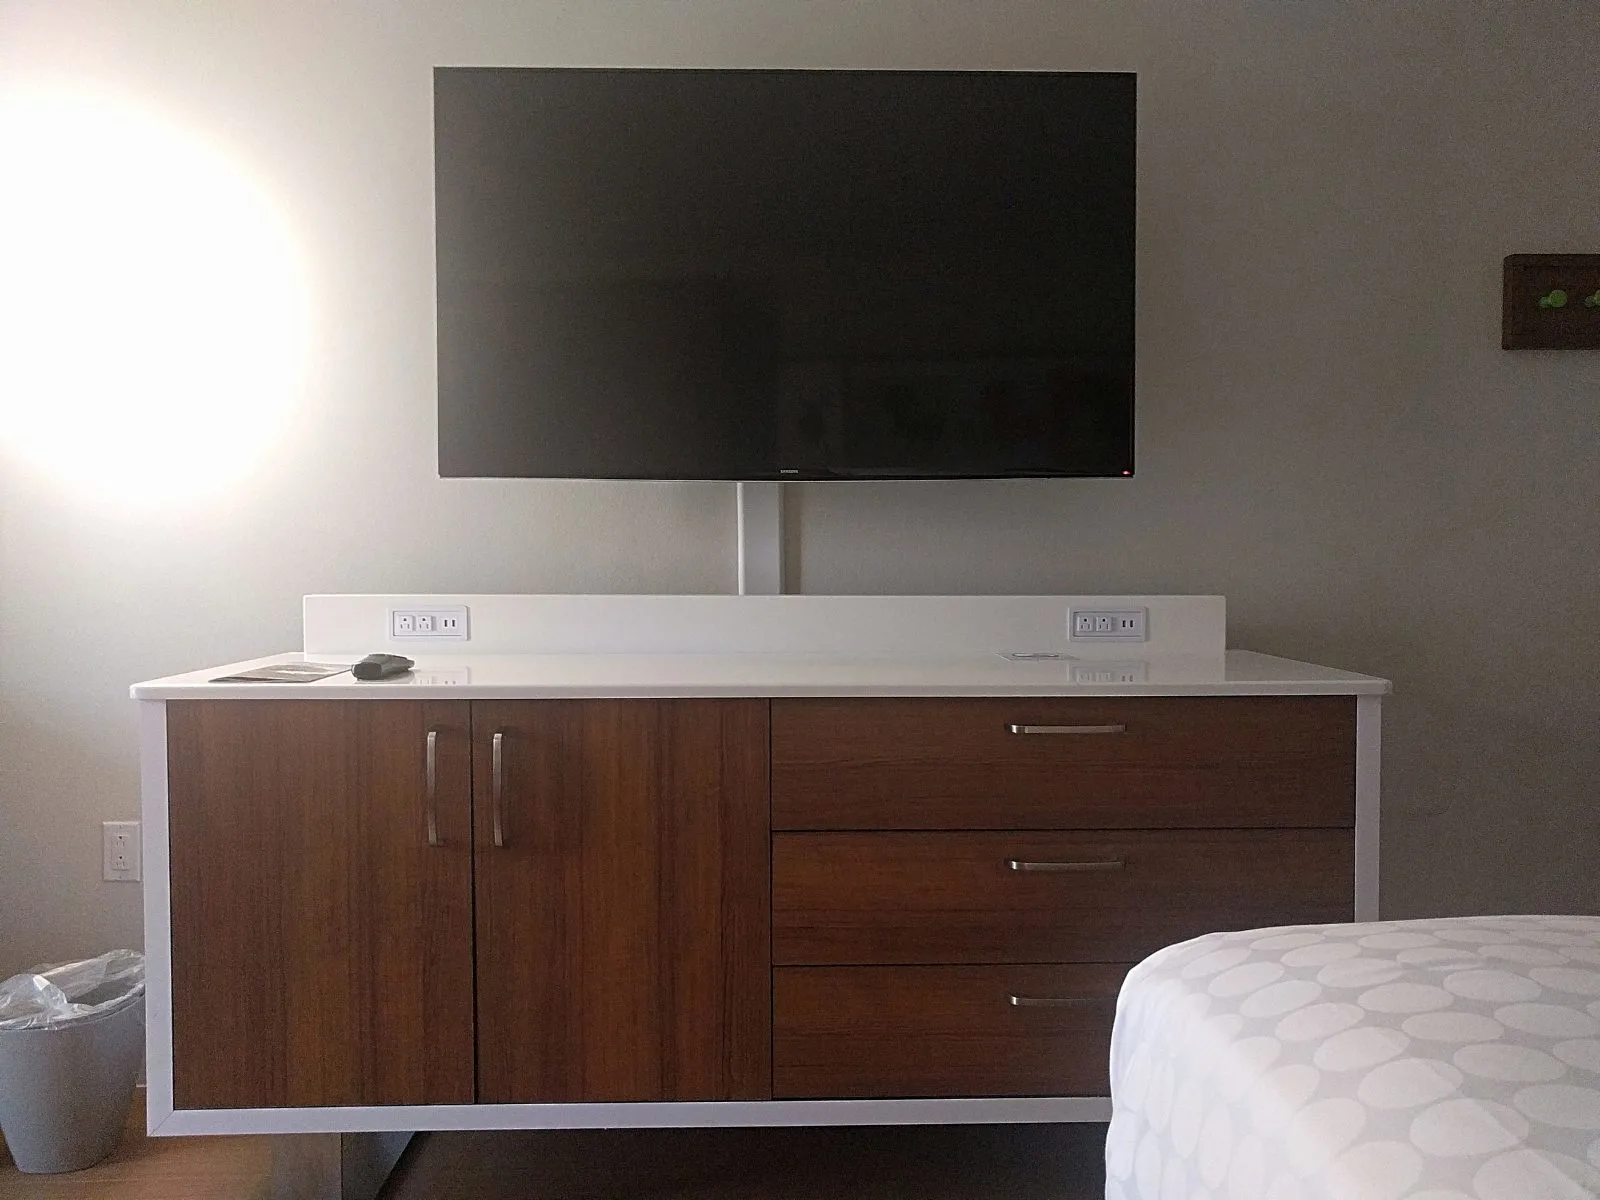 tv and dresser in the room